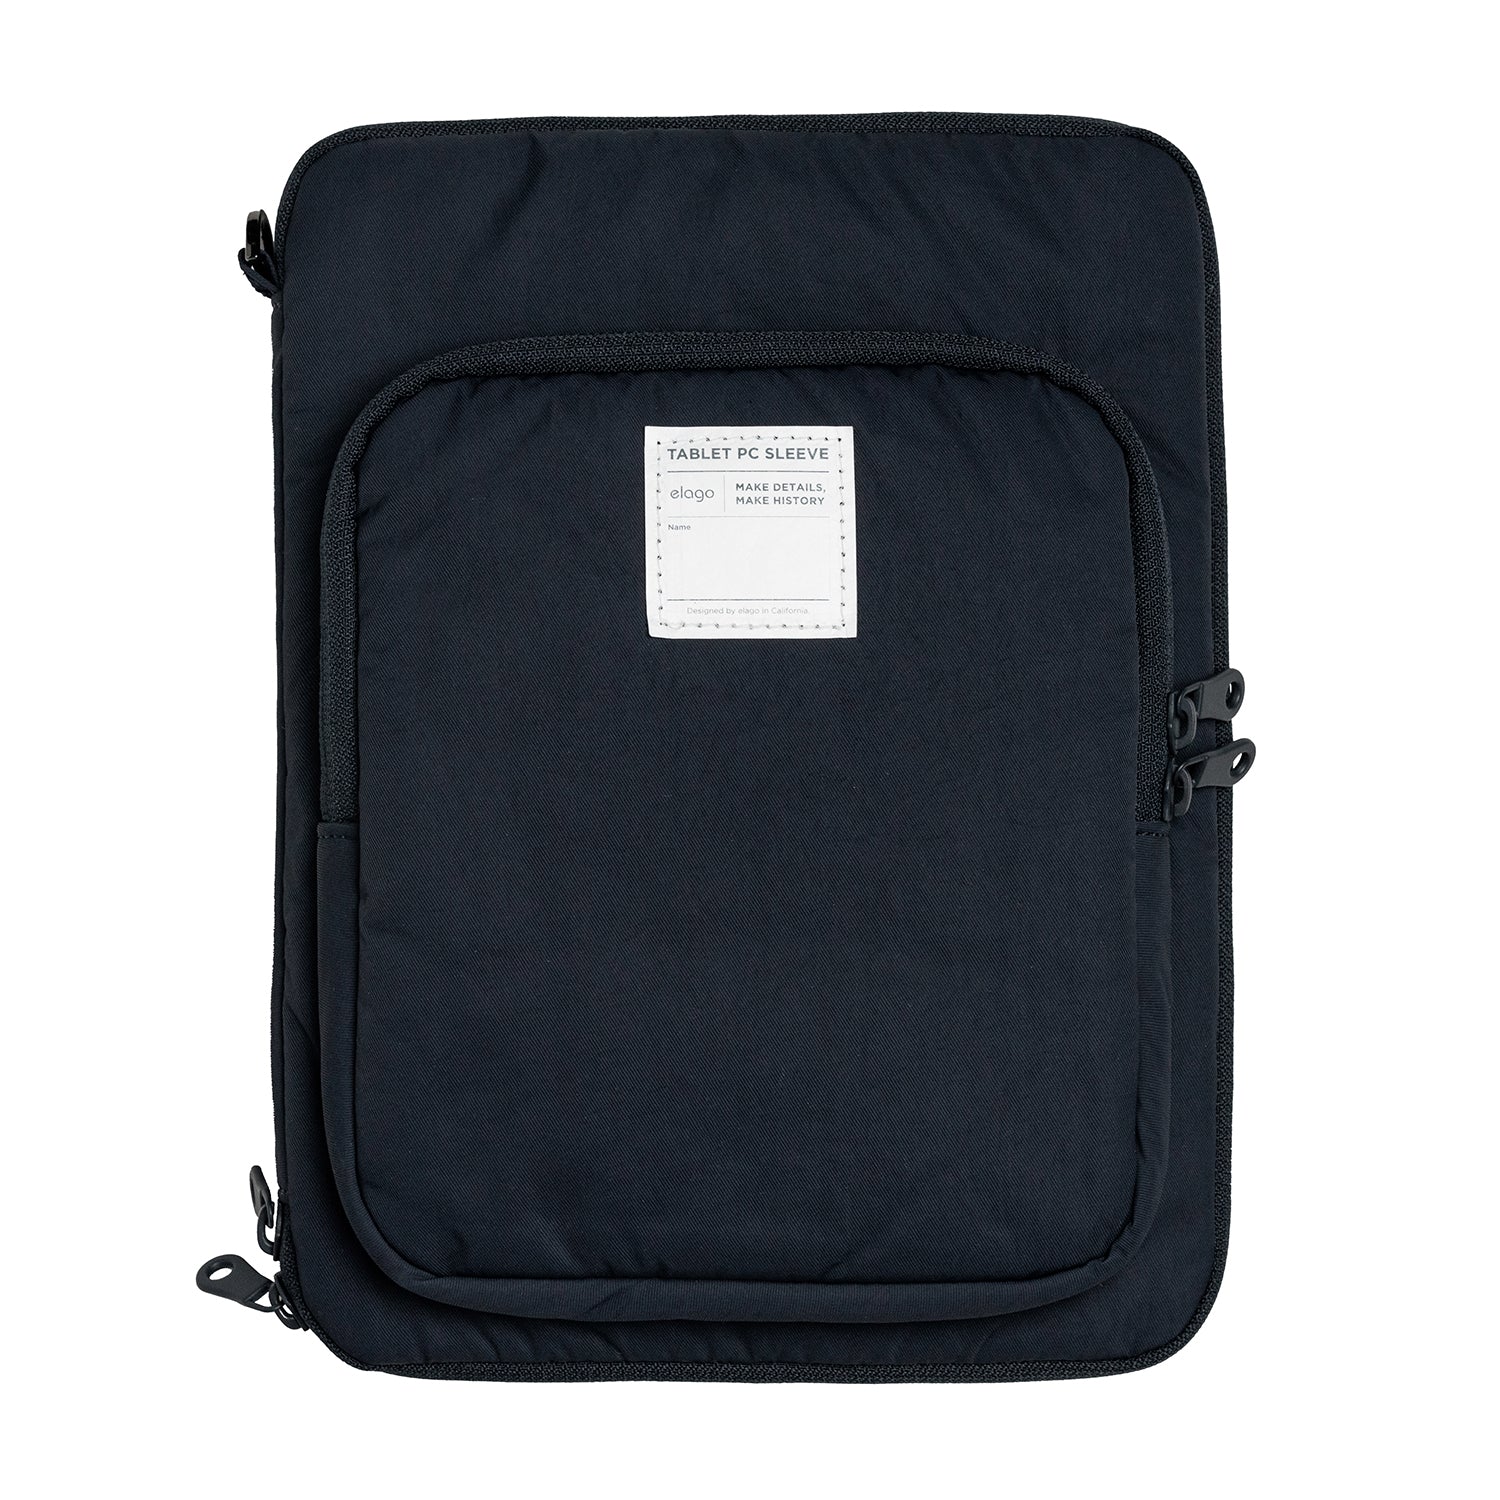 Tablet and Laptop Sleeve with Velcro Pouch - elago